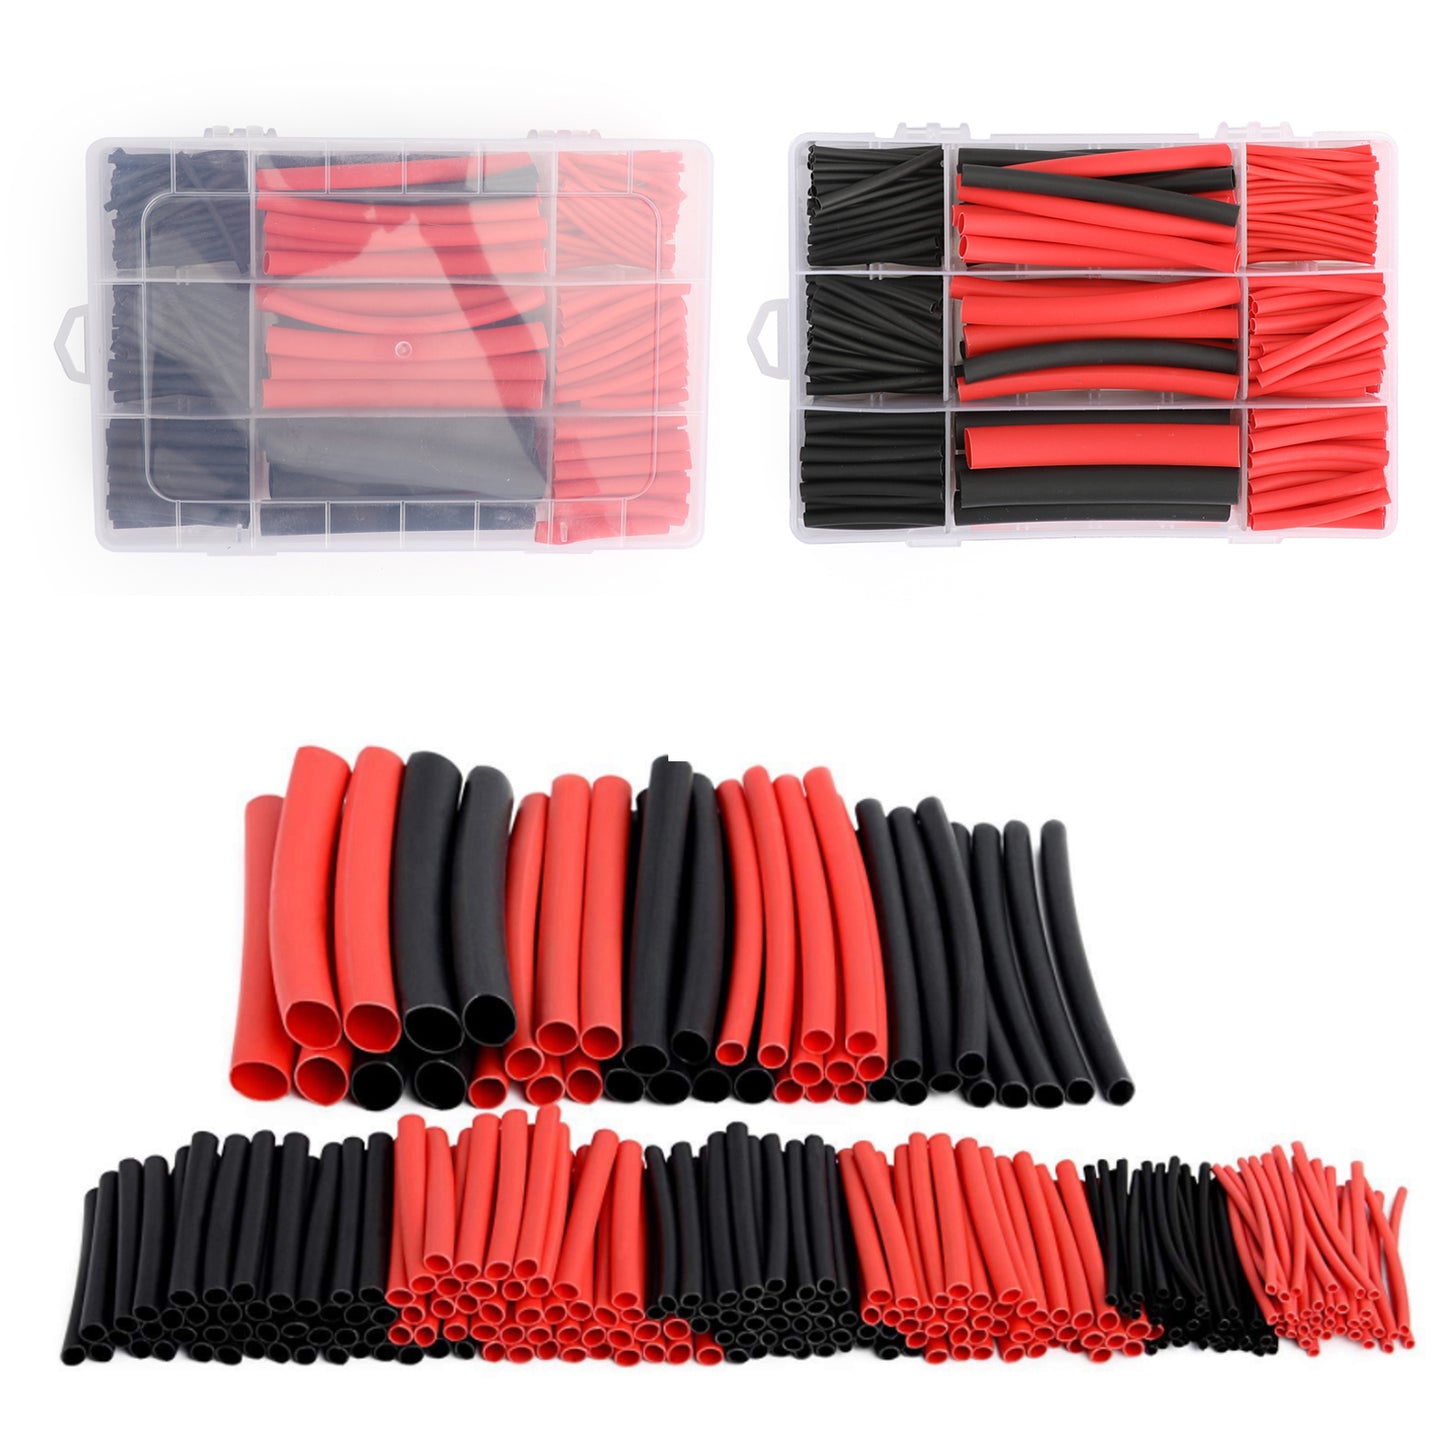 270PCS 3:1 Waterproof Dual Wall Adhesive Heat Shrink Insulation Shrinkable Tube Wire Cable Sleeve Kit Waterproof